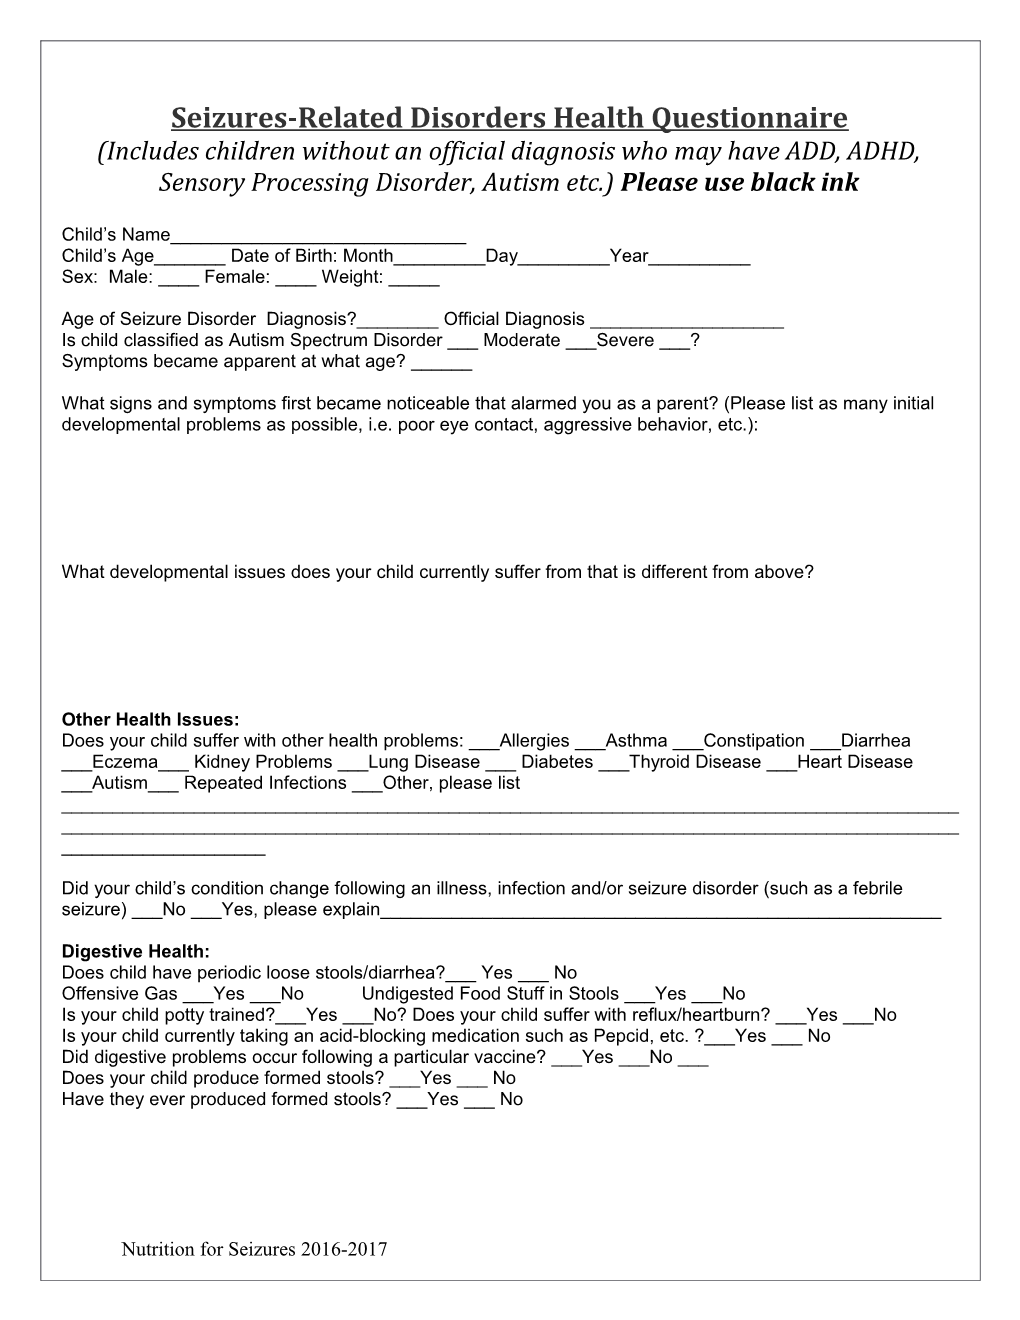 Seizures-Related Disorders Health Questionnaire